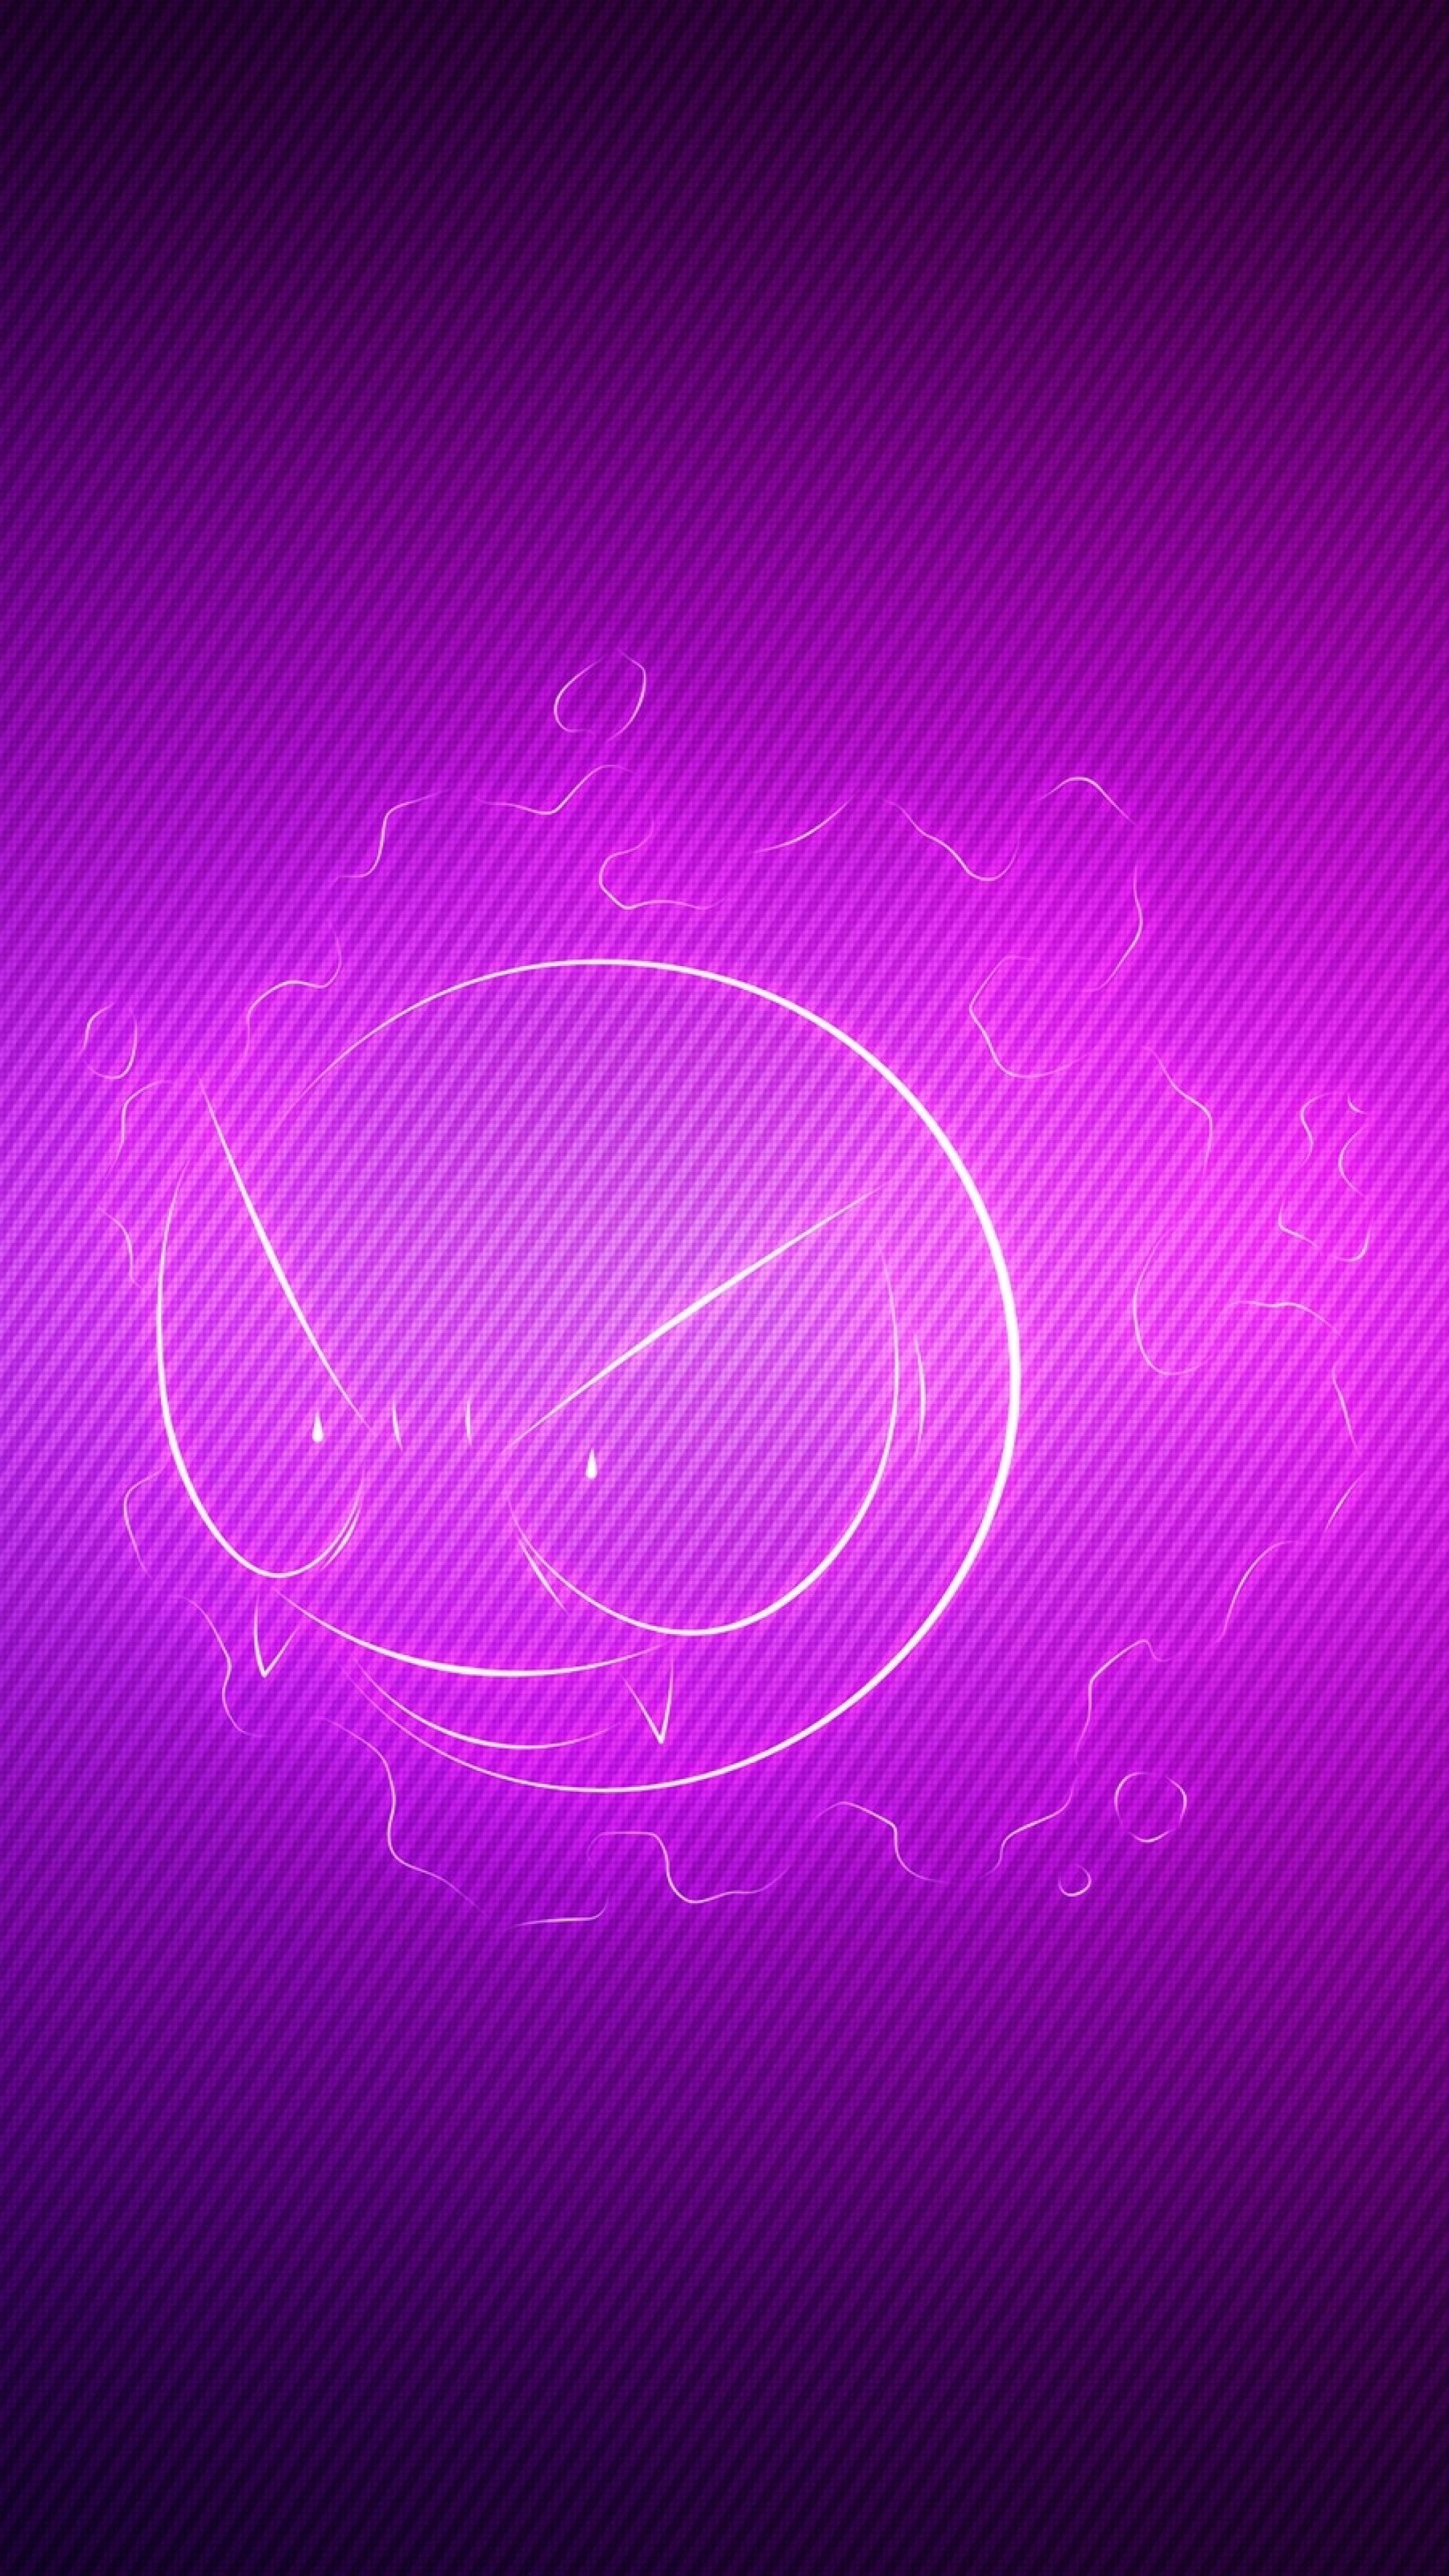 Gastly: Pokemon that can envelop an opponent of any size and cause suffocation. 2160x3840 4K Wallpaper.